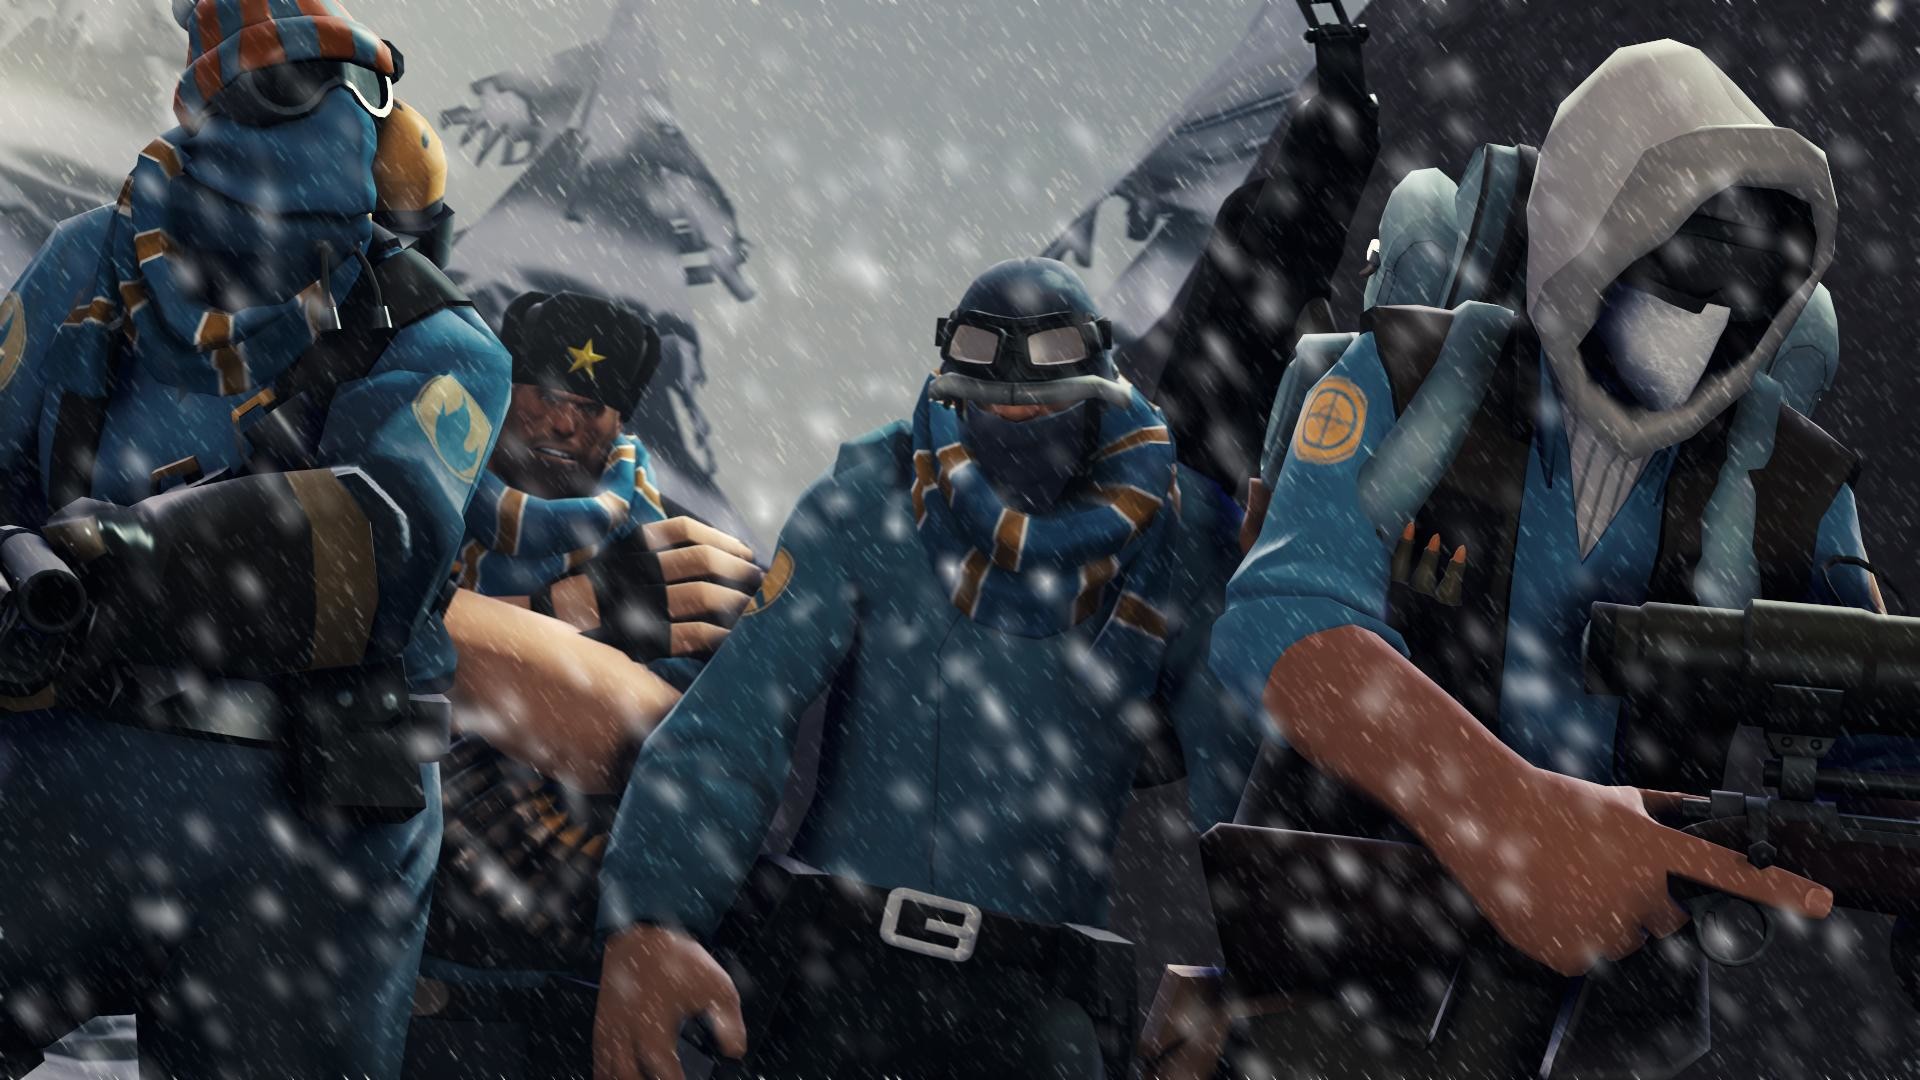 1920x1080 99 MORE TF2 Wallpapers made in SFM